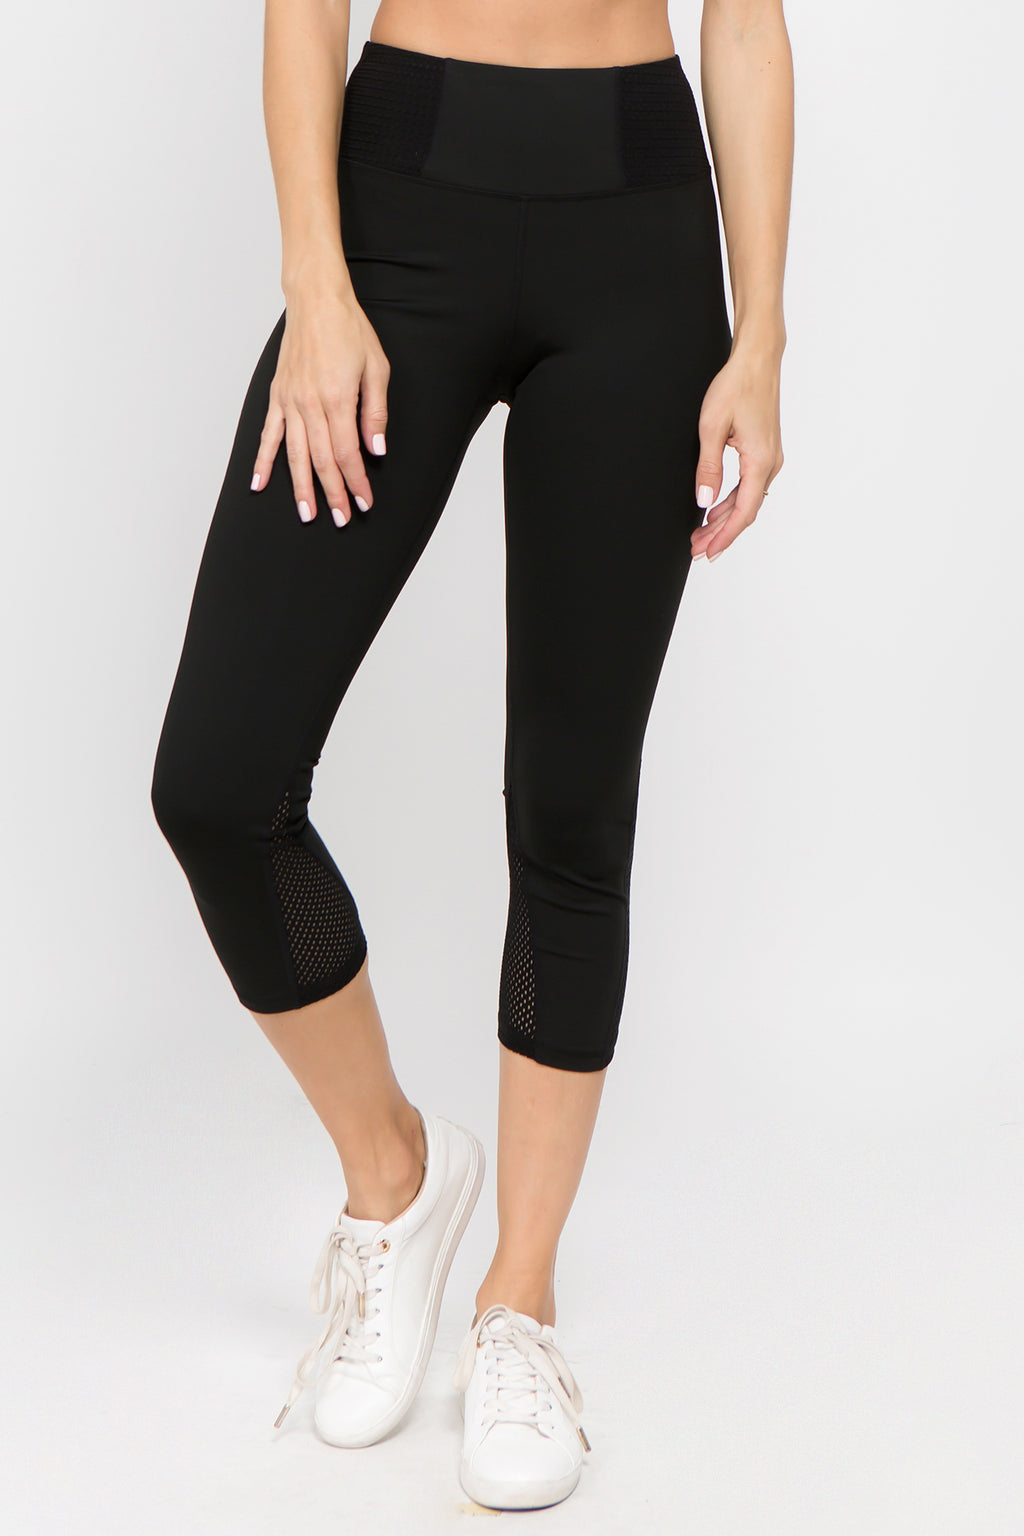 black high waisted crop leggings with pockets